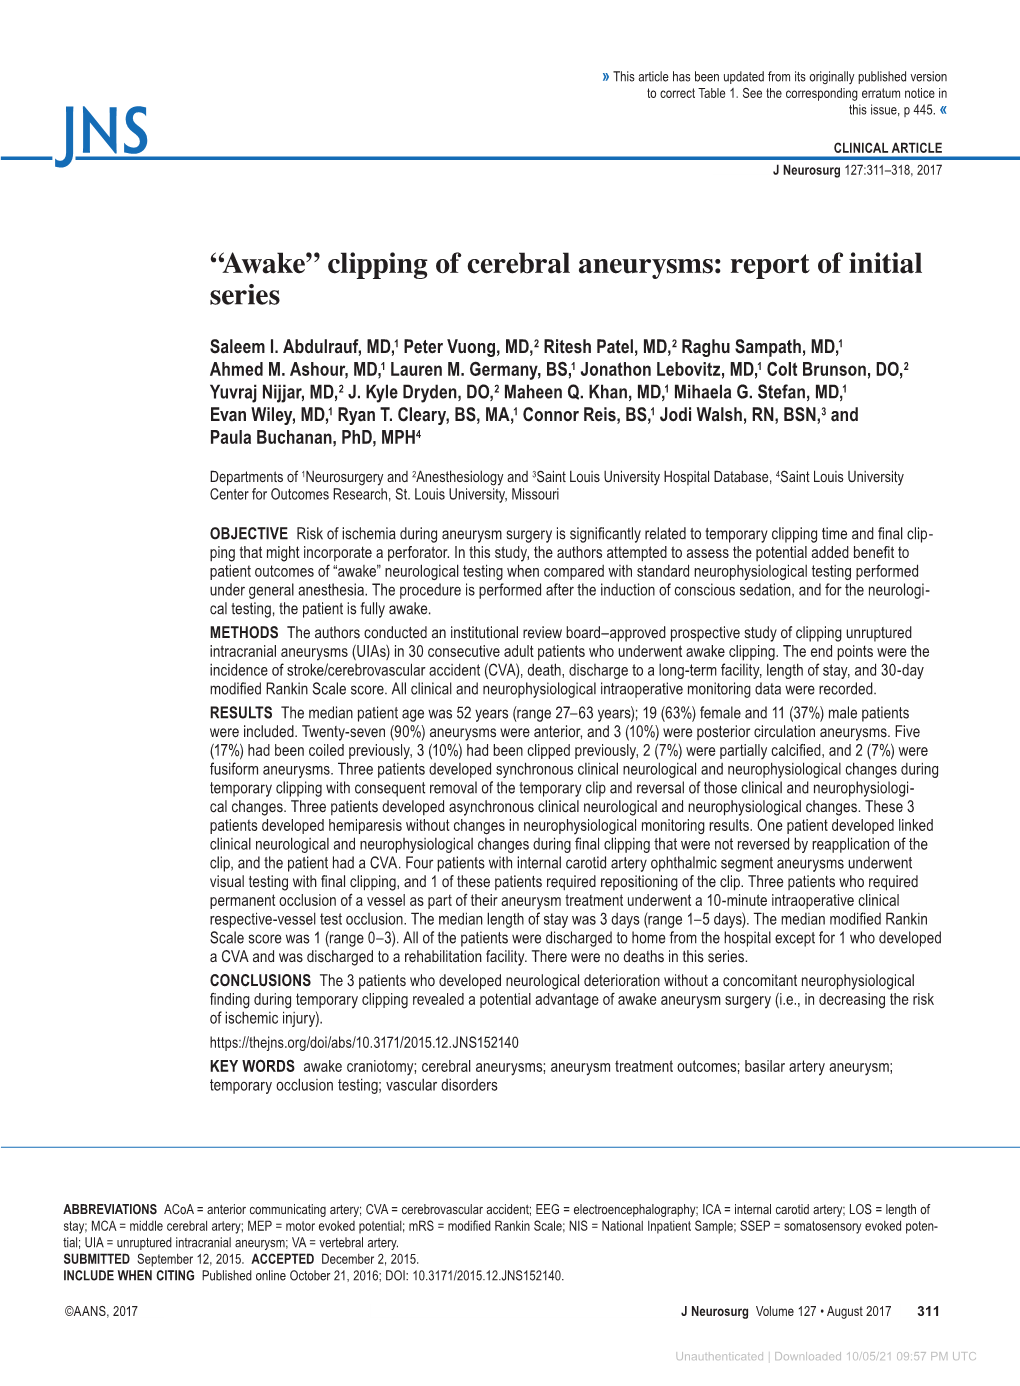 “Awake” Clipping of Cerebral Aneurysms: Report of Initial Series